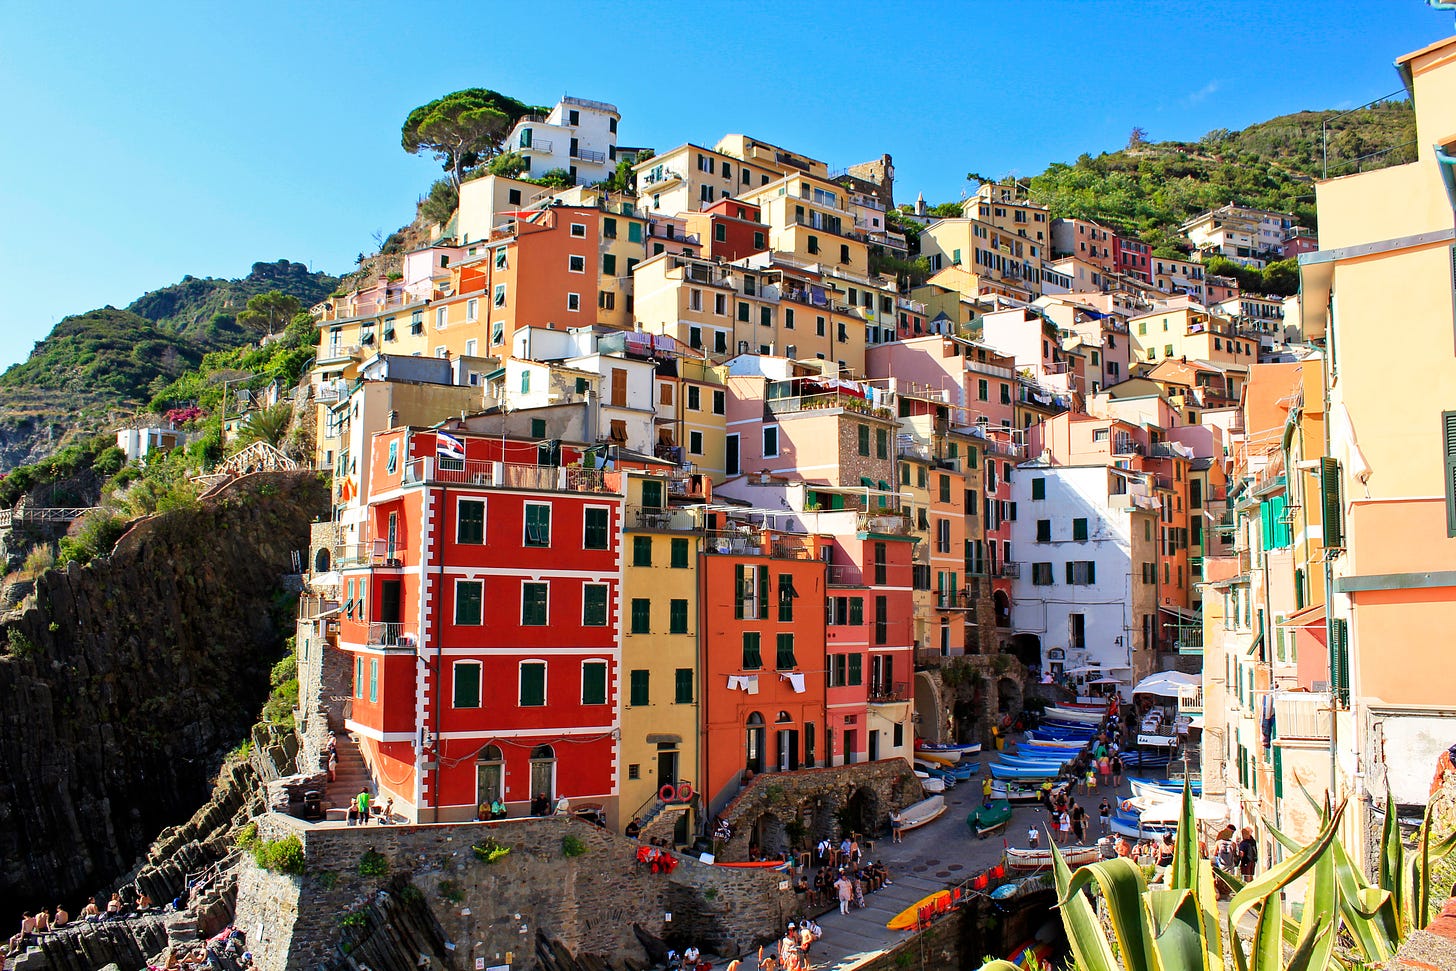 Riomaggiore, Italy, a seaside city with colorful buildings